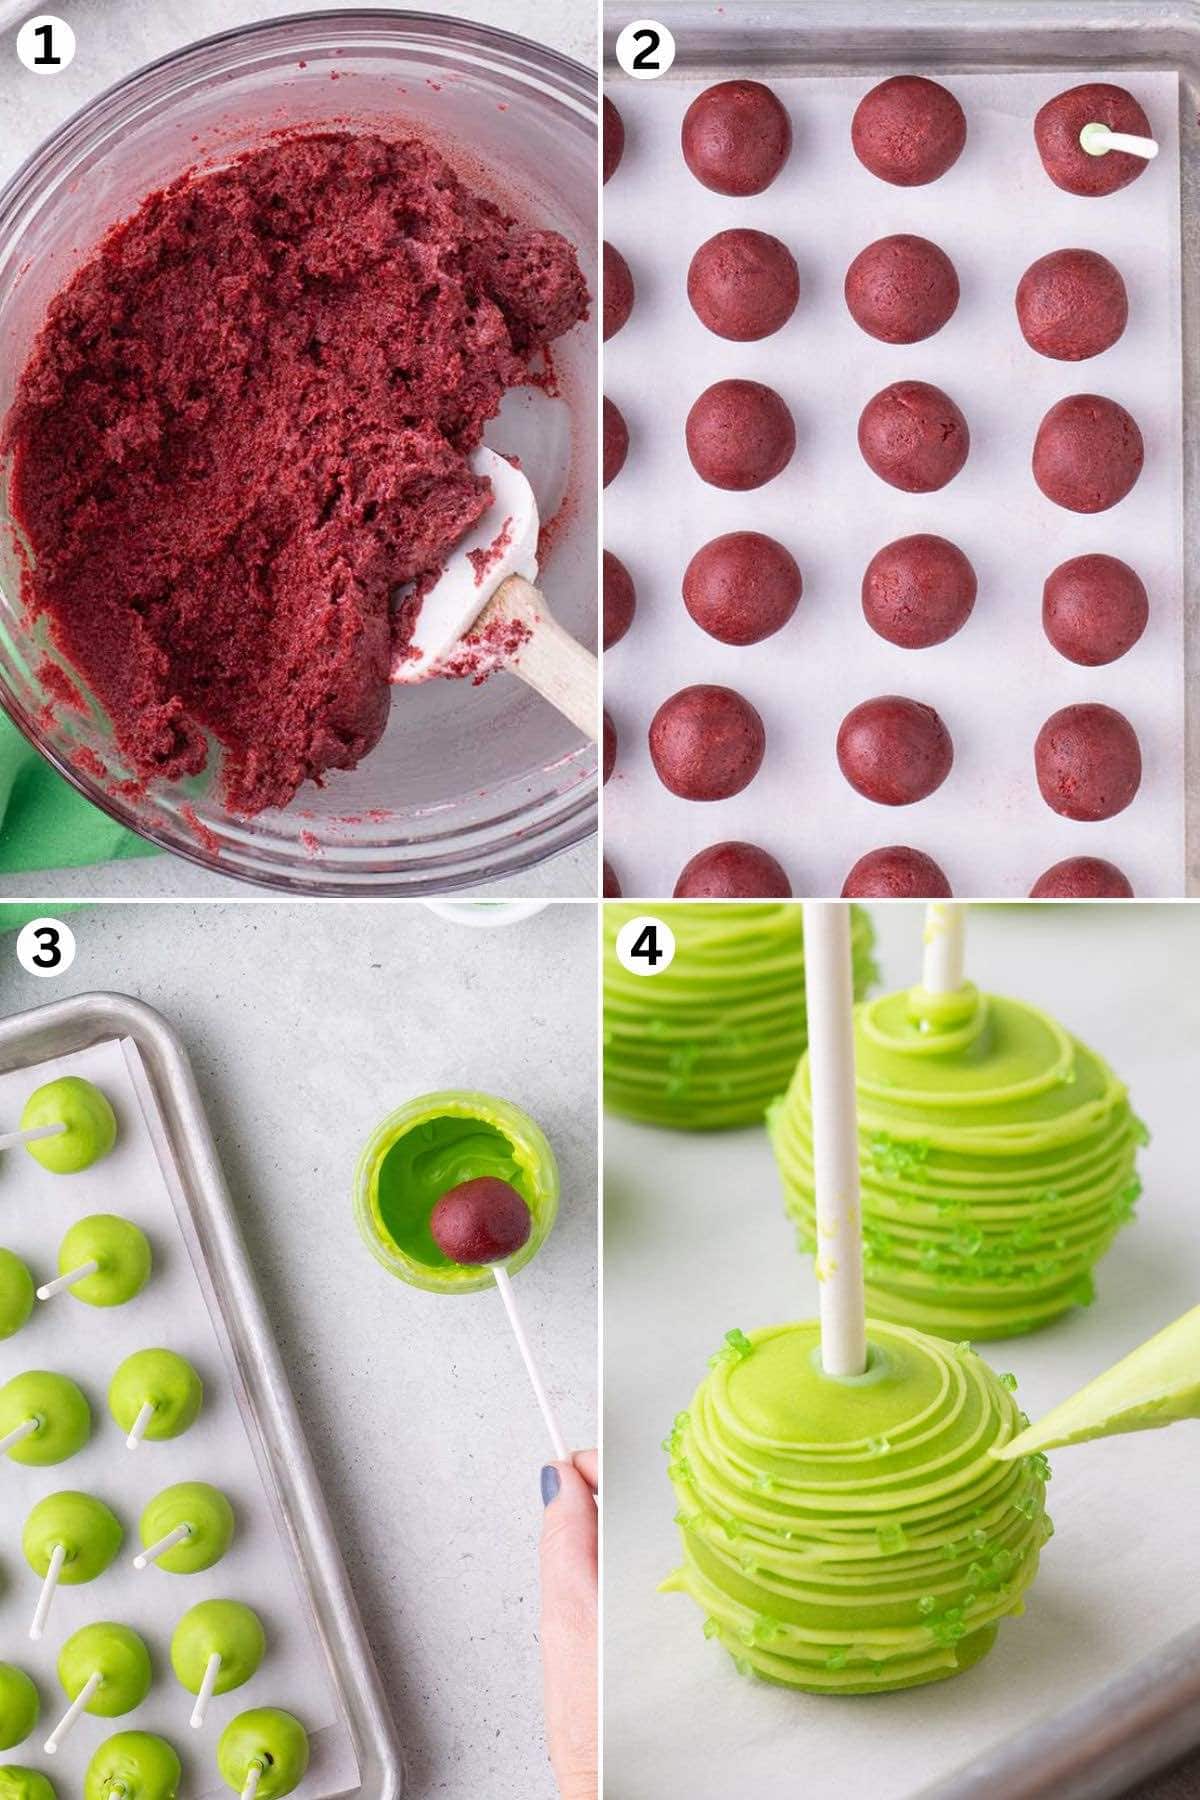 cake pop mixture in a bowl. roll the mixture into balls and stick cake pop stick on top. dip into green coating. decorate the cake pop.